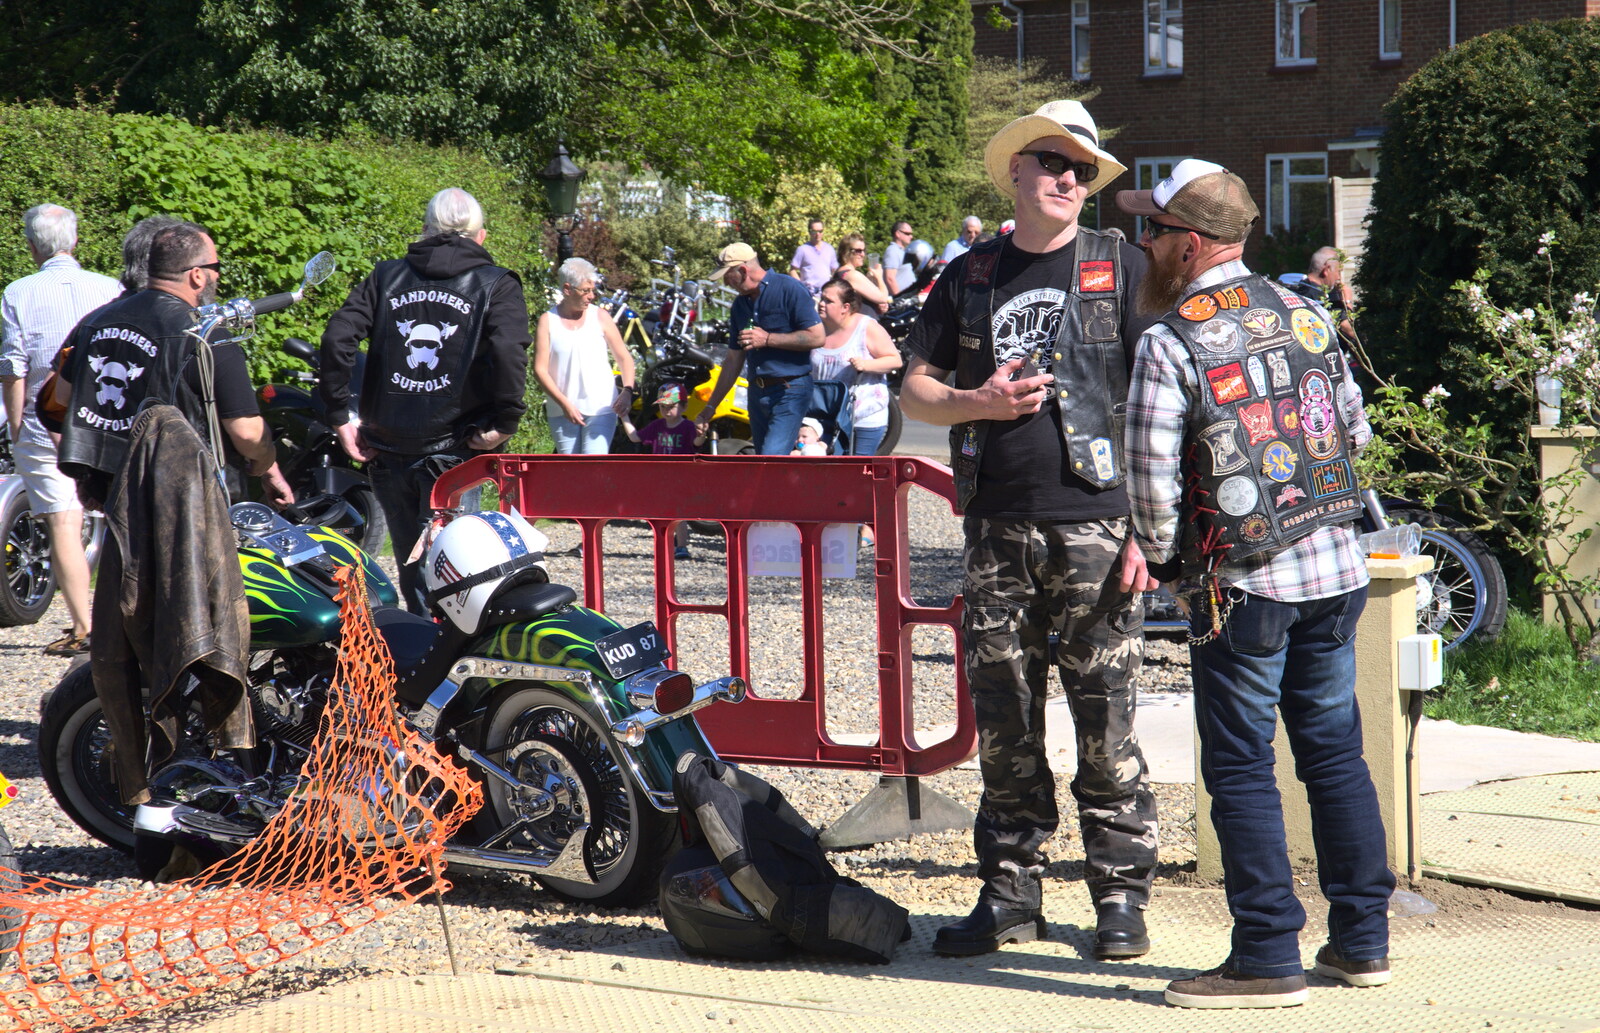 Bikers have a chat from Beer, Bikes and Bands, Burston Crown, Burston, Norfolk - 6th May 2018